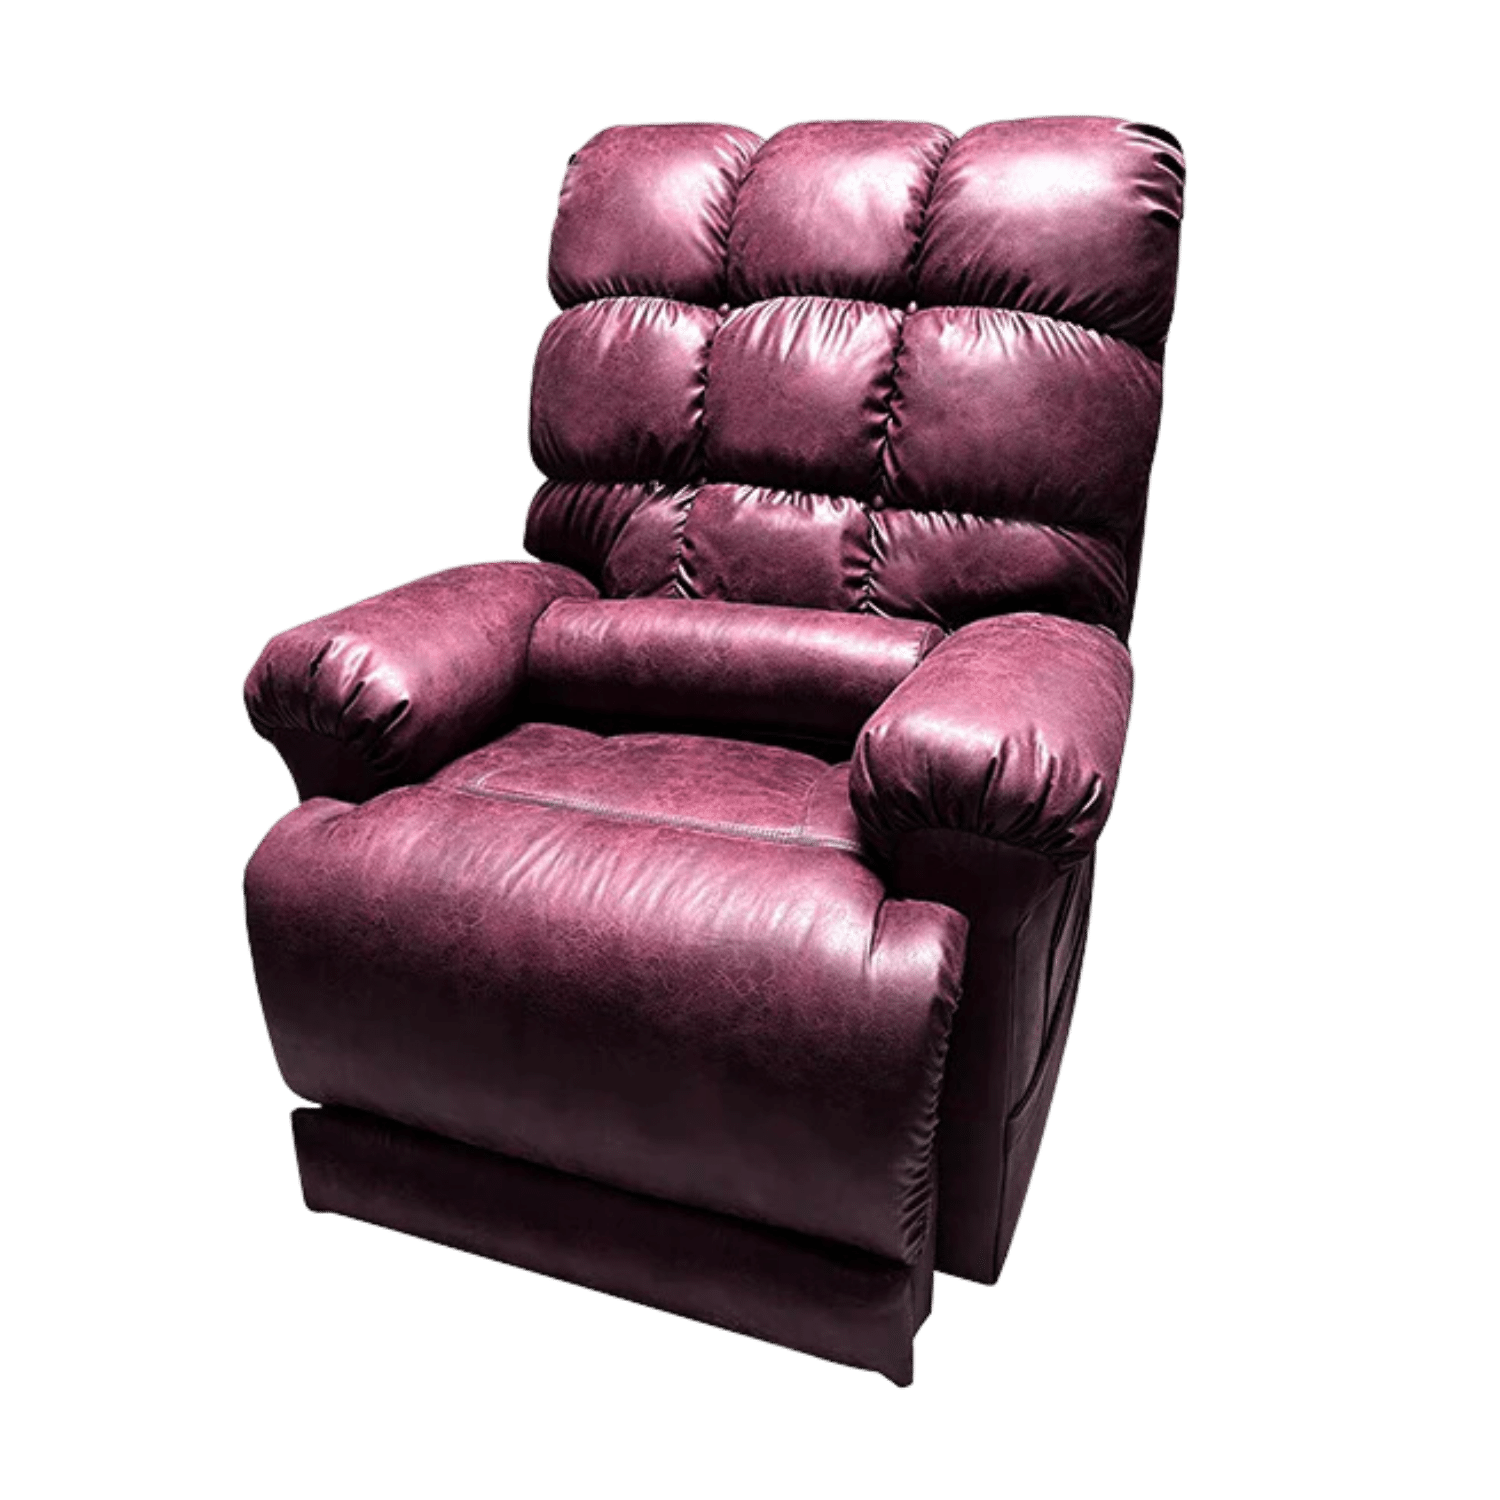 JOURNEY Lift Chair Perfect Sleep Chair Power Recliner - Deluxe 2 Zone